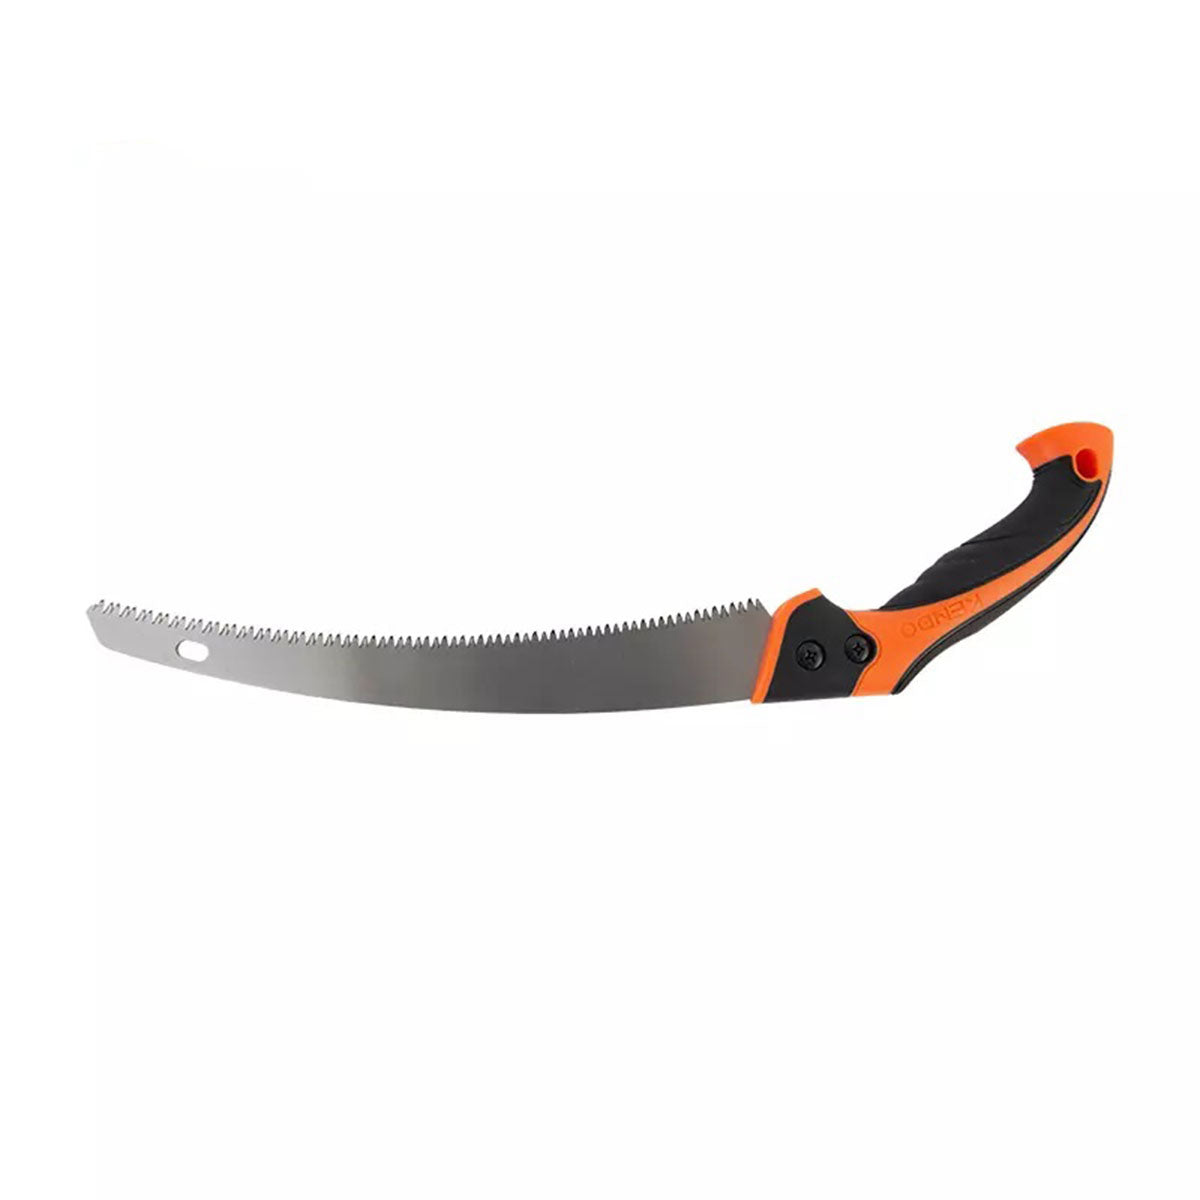 Kendo 300mm Curved Saw